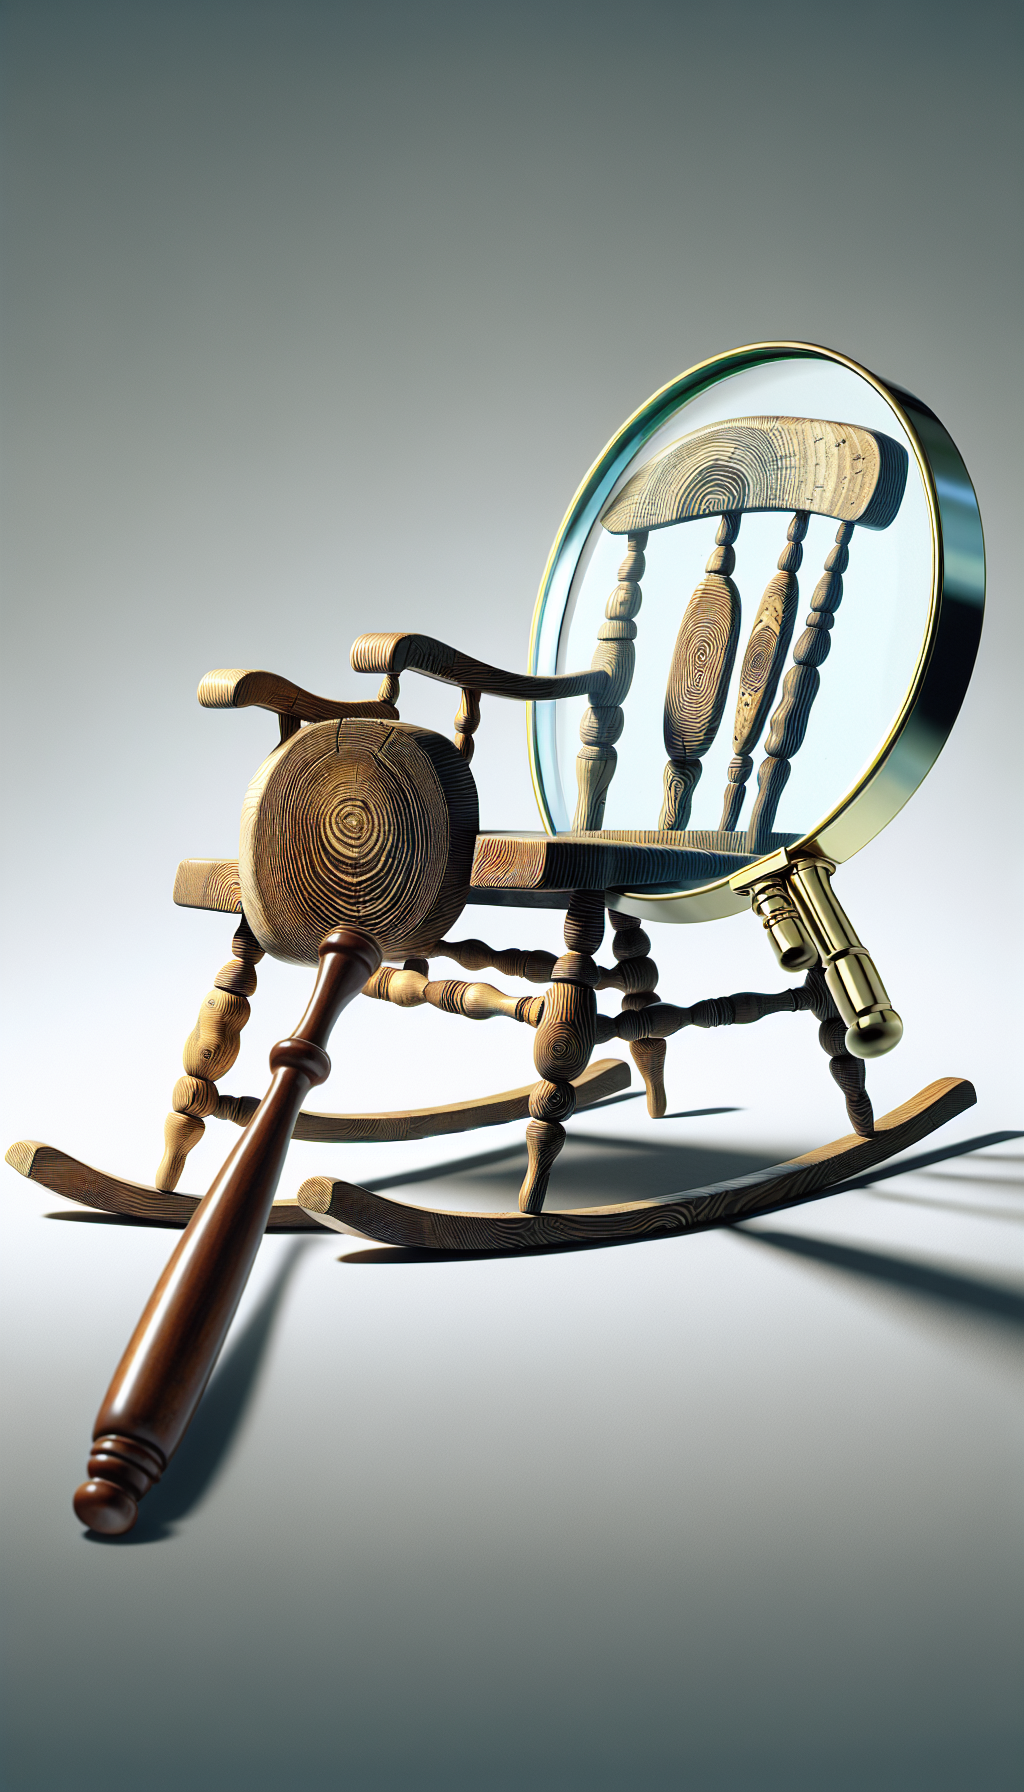 A magnifying glass hovers over an intricately carved rocking chair, with age rings like a tree trunk and historical timelines etched upon its runners. Each etching glows to signify its valuable origin and era. The chair casts a shadow morphing into an auctioneer's gavel, symbolizing its high worth. The styles vary from photorealistic to line art, embodying a fusion of time and valuation.